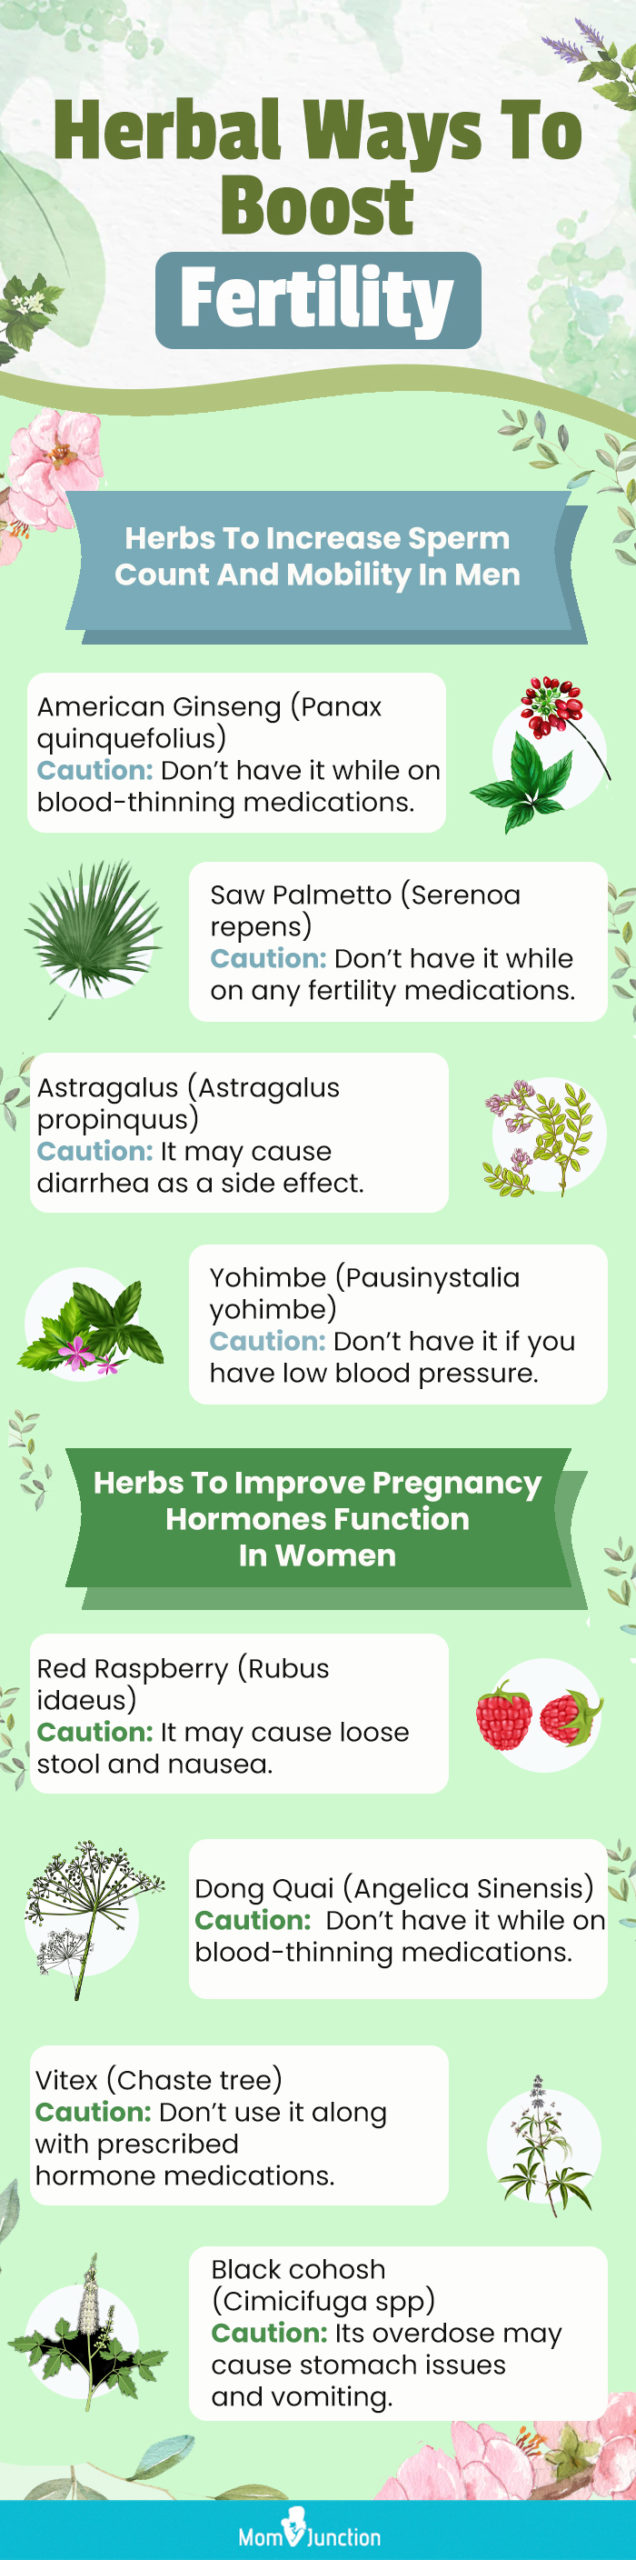 herbal ways to boost fertility [infographic]